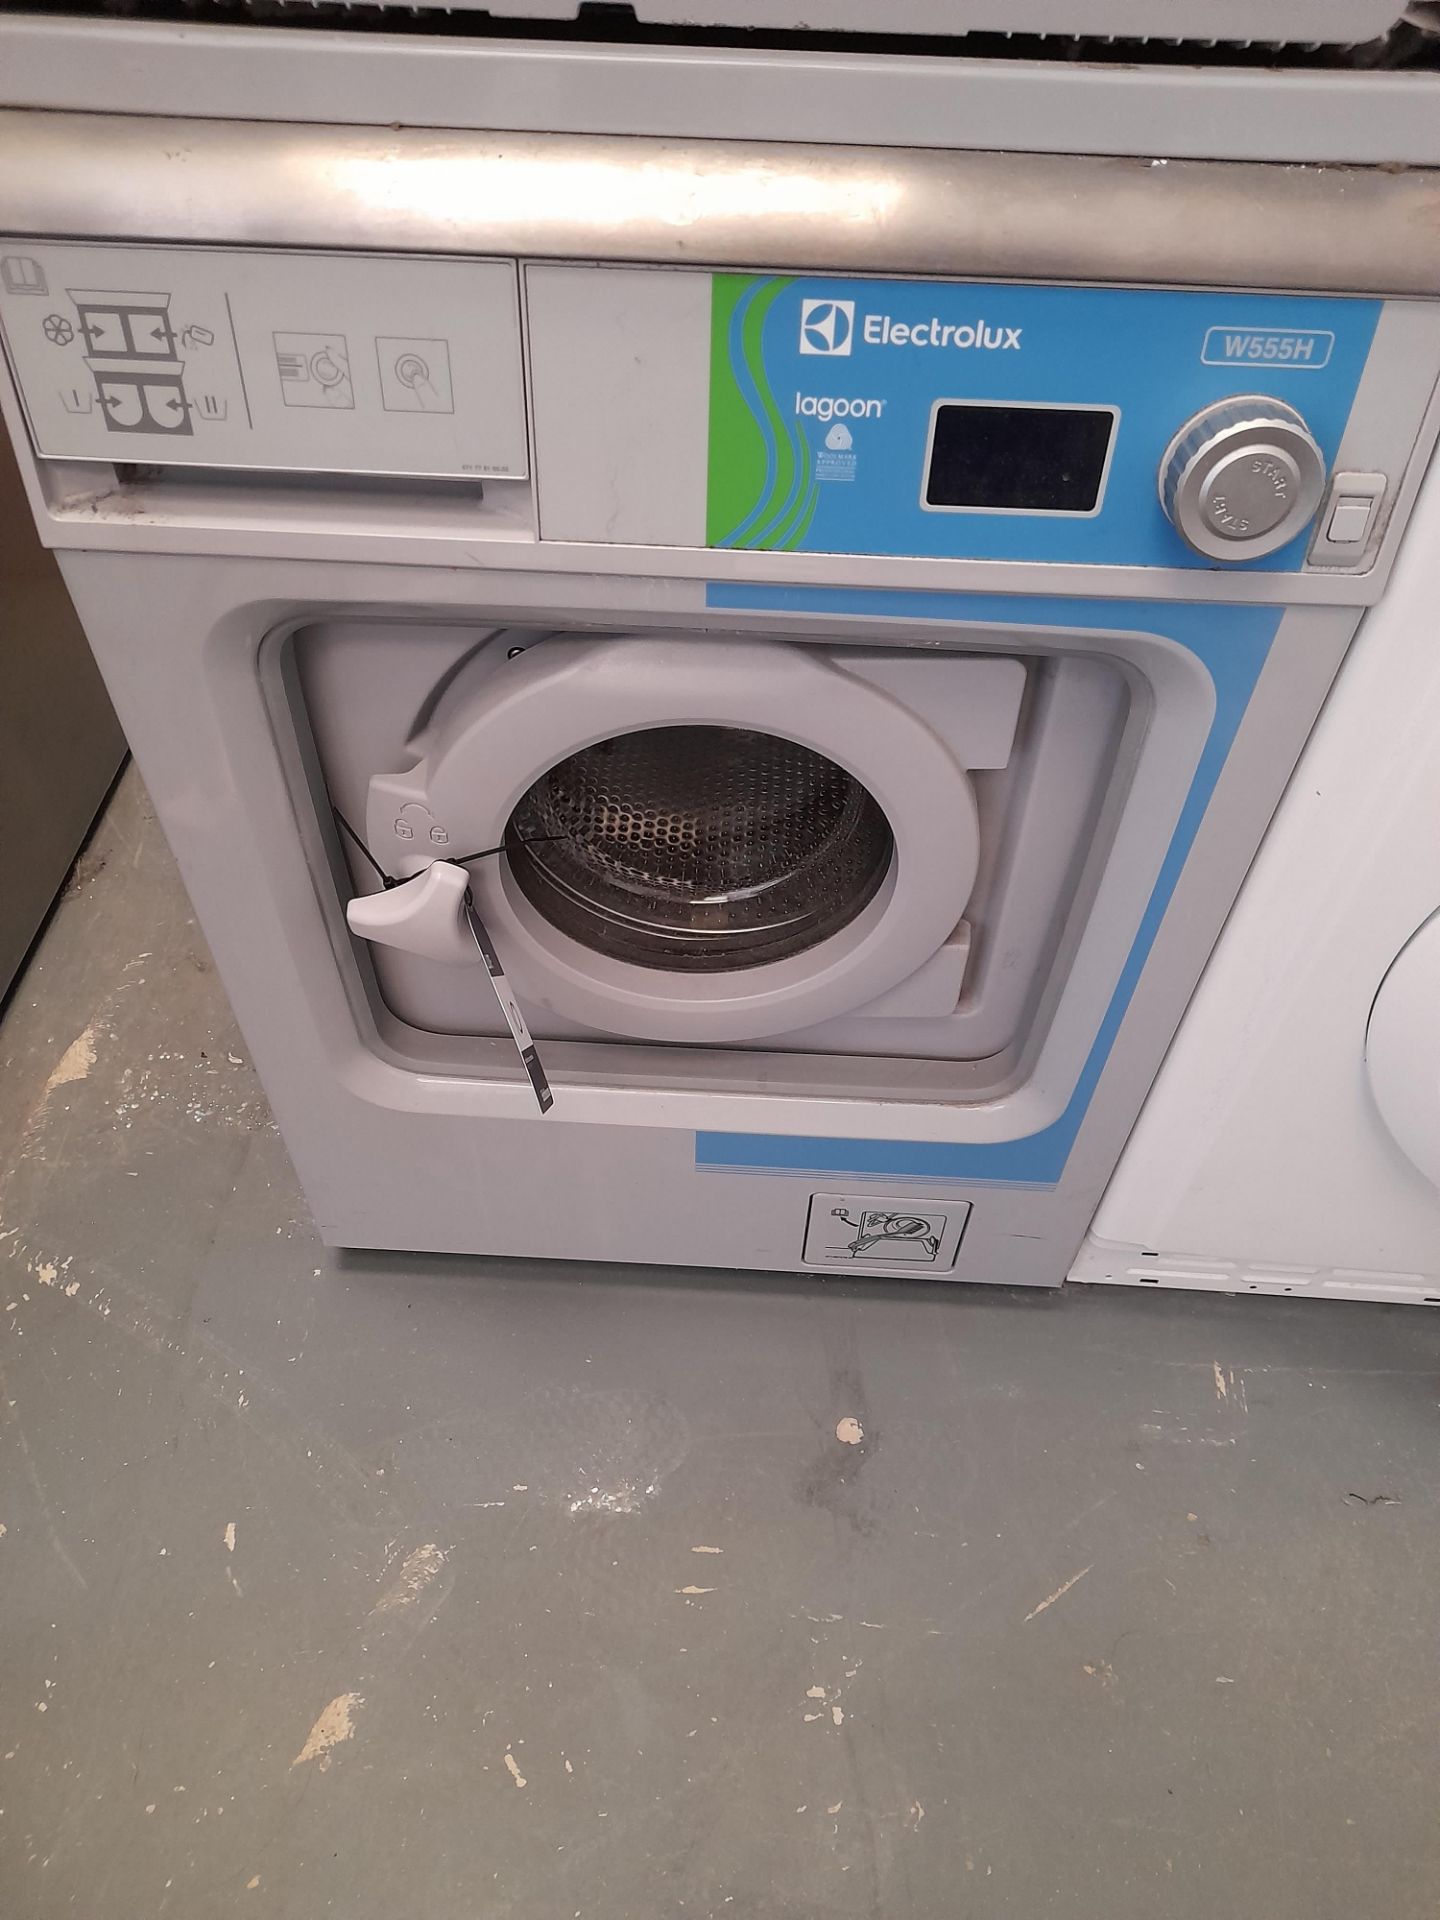 Electrolux Lagoon W555H commercial washing machine (Serial Number: 60055 / 0153947, Year: 2016, - Image 2 of 10